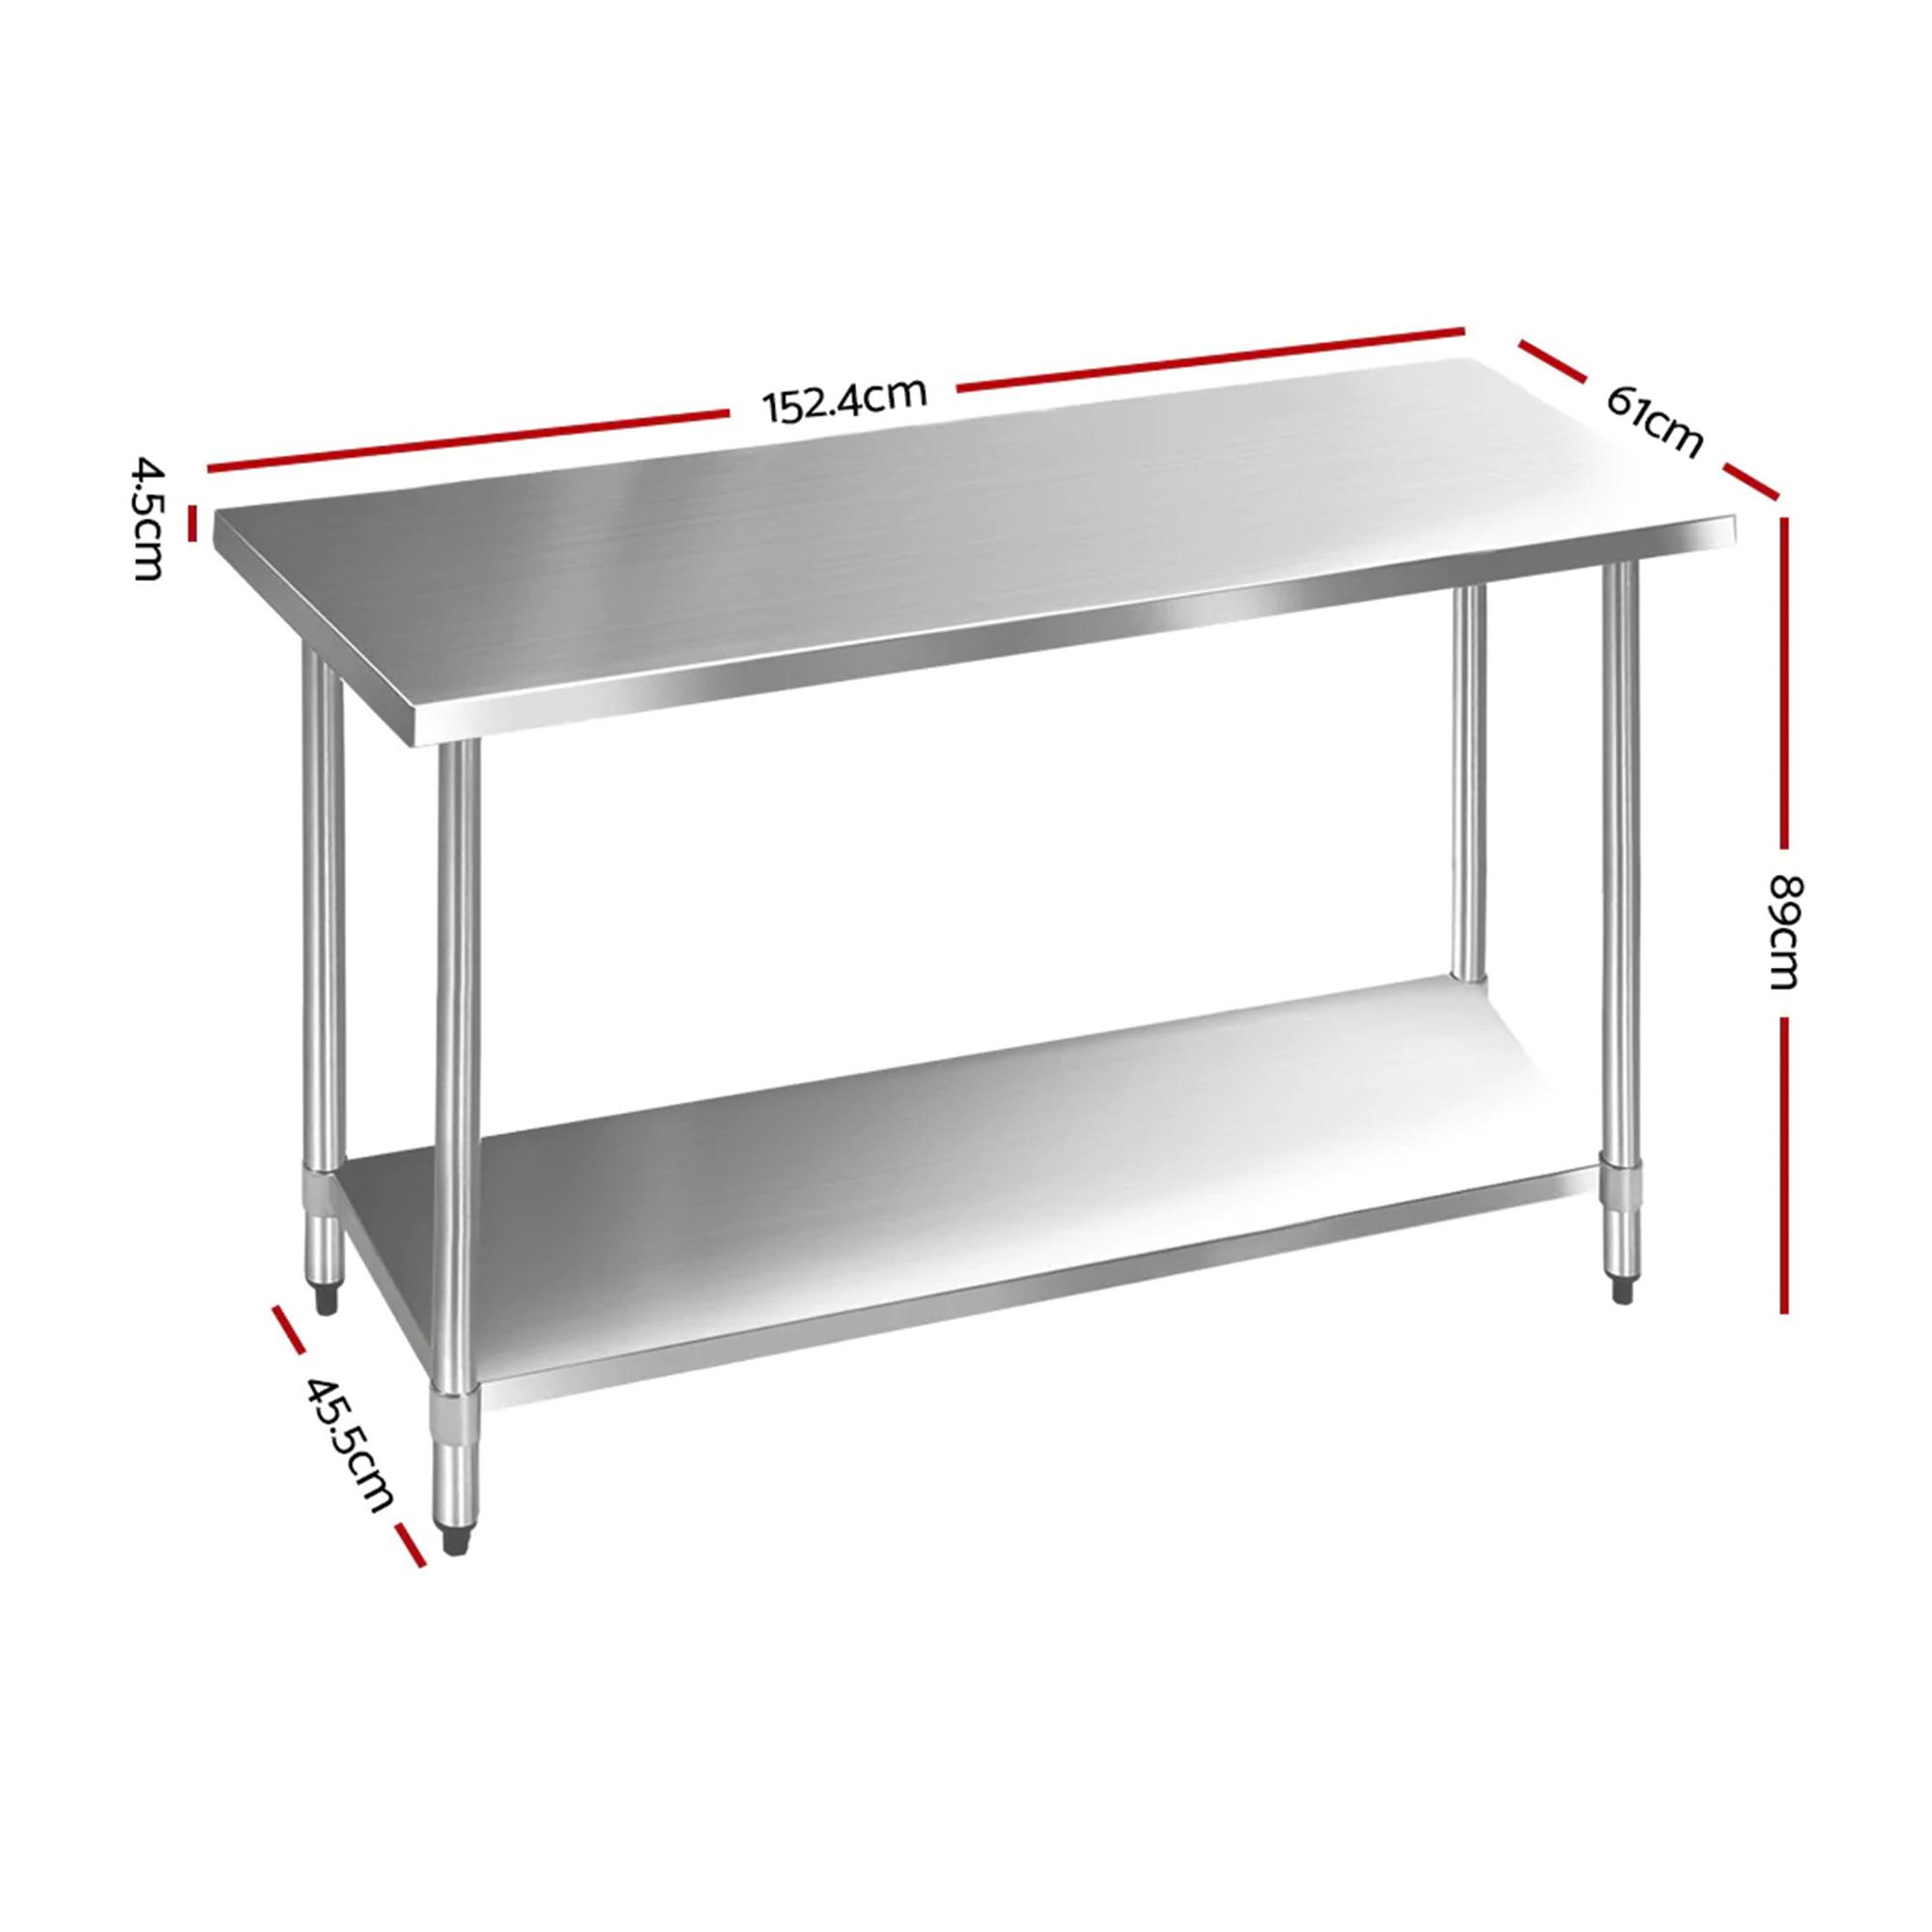 Cefito 304 Stainless Steel Kitchen Bench 152.4x61cm Image 3